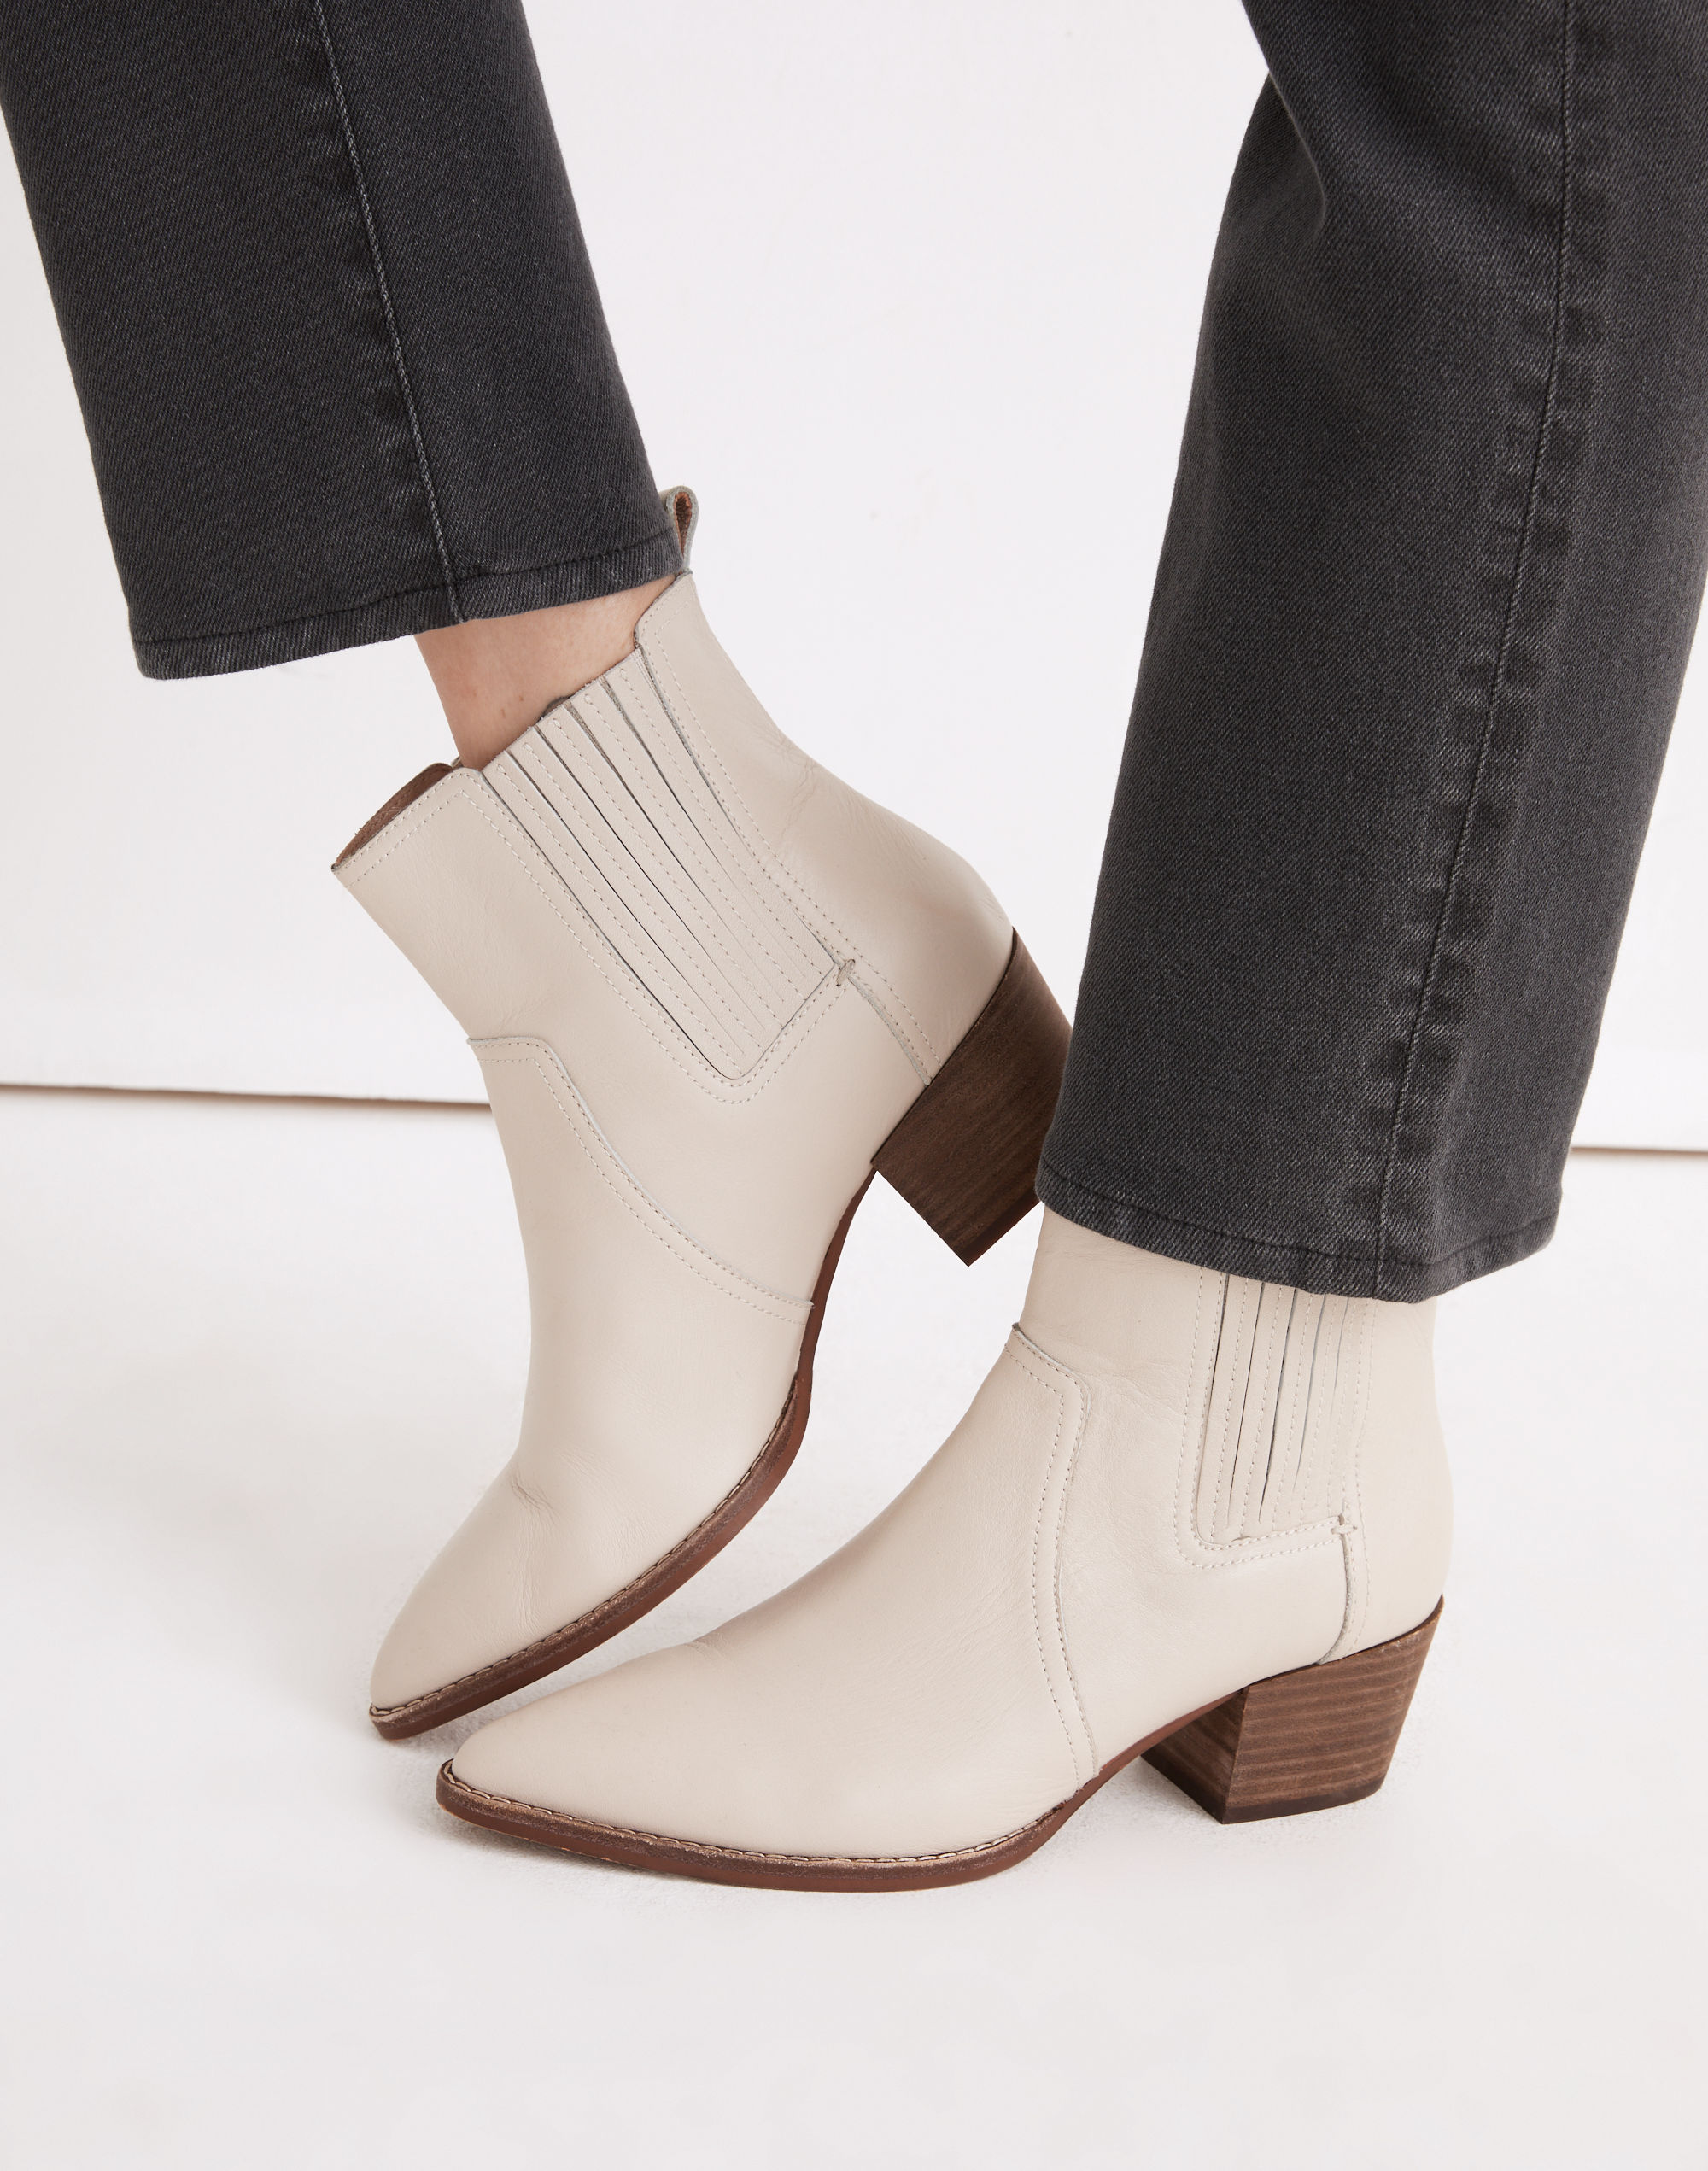 The Western Ankle Boot in Leather